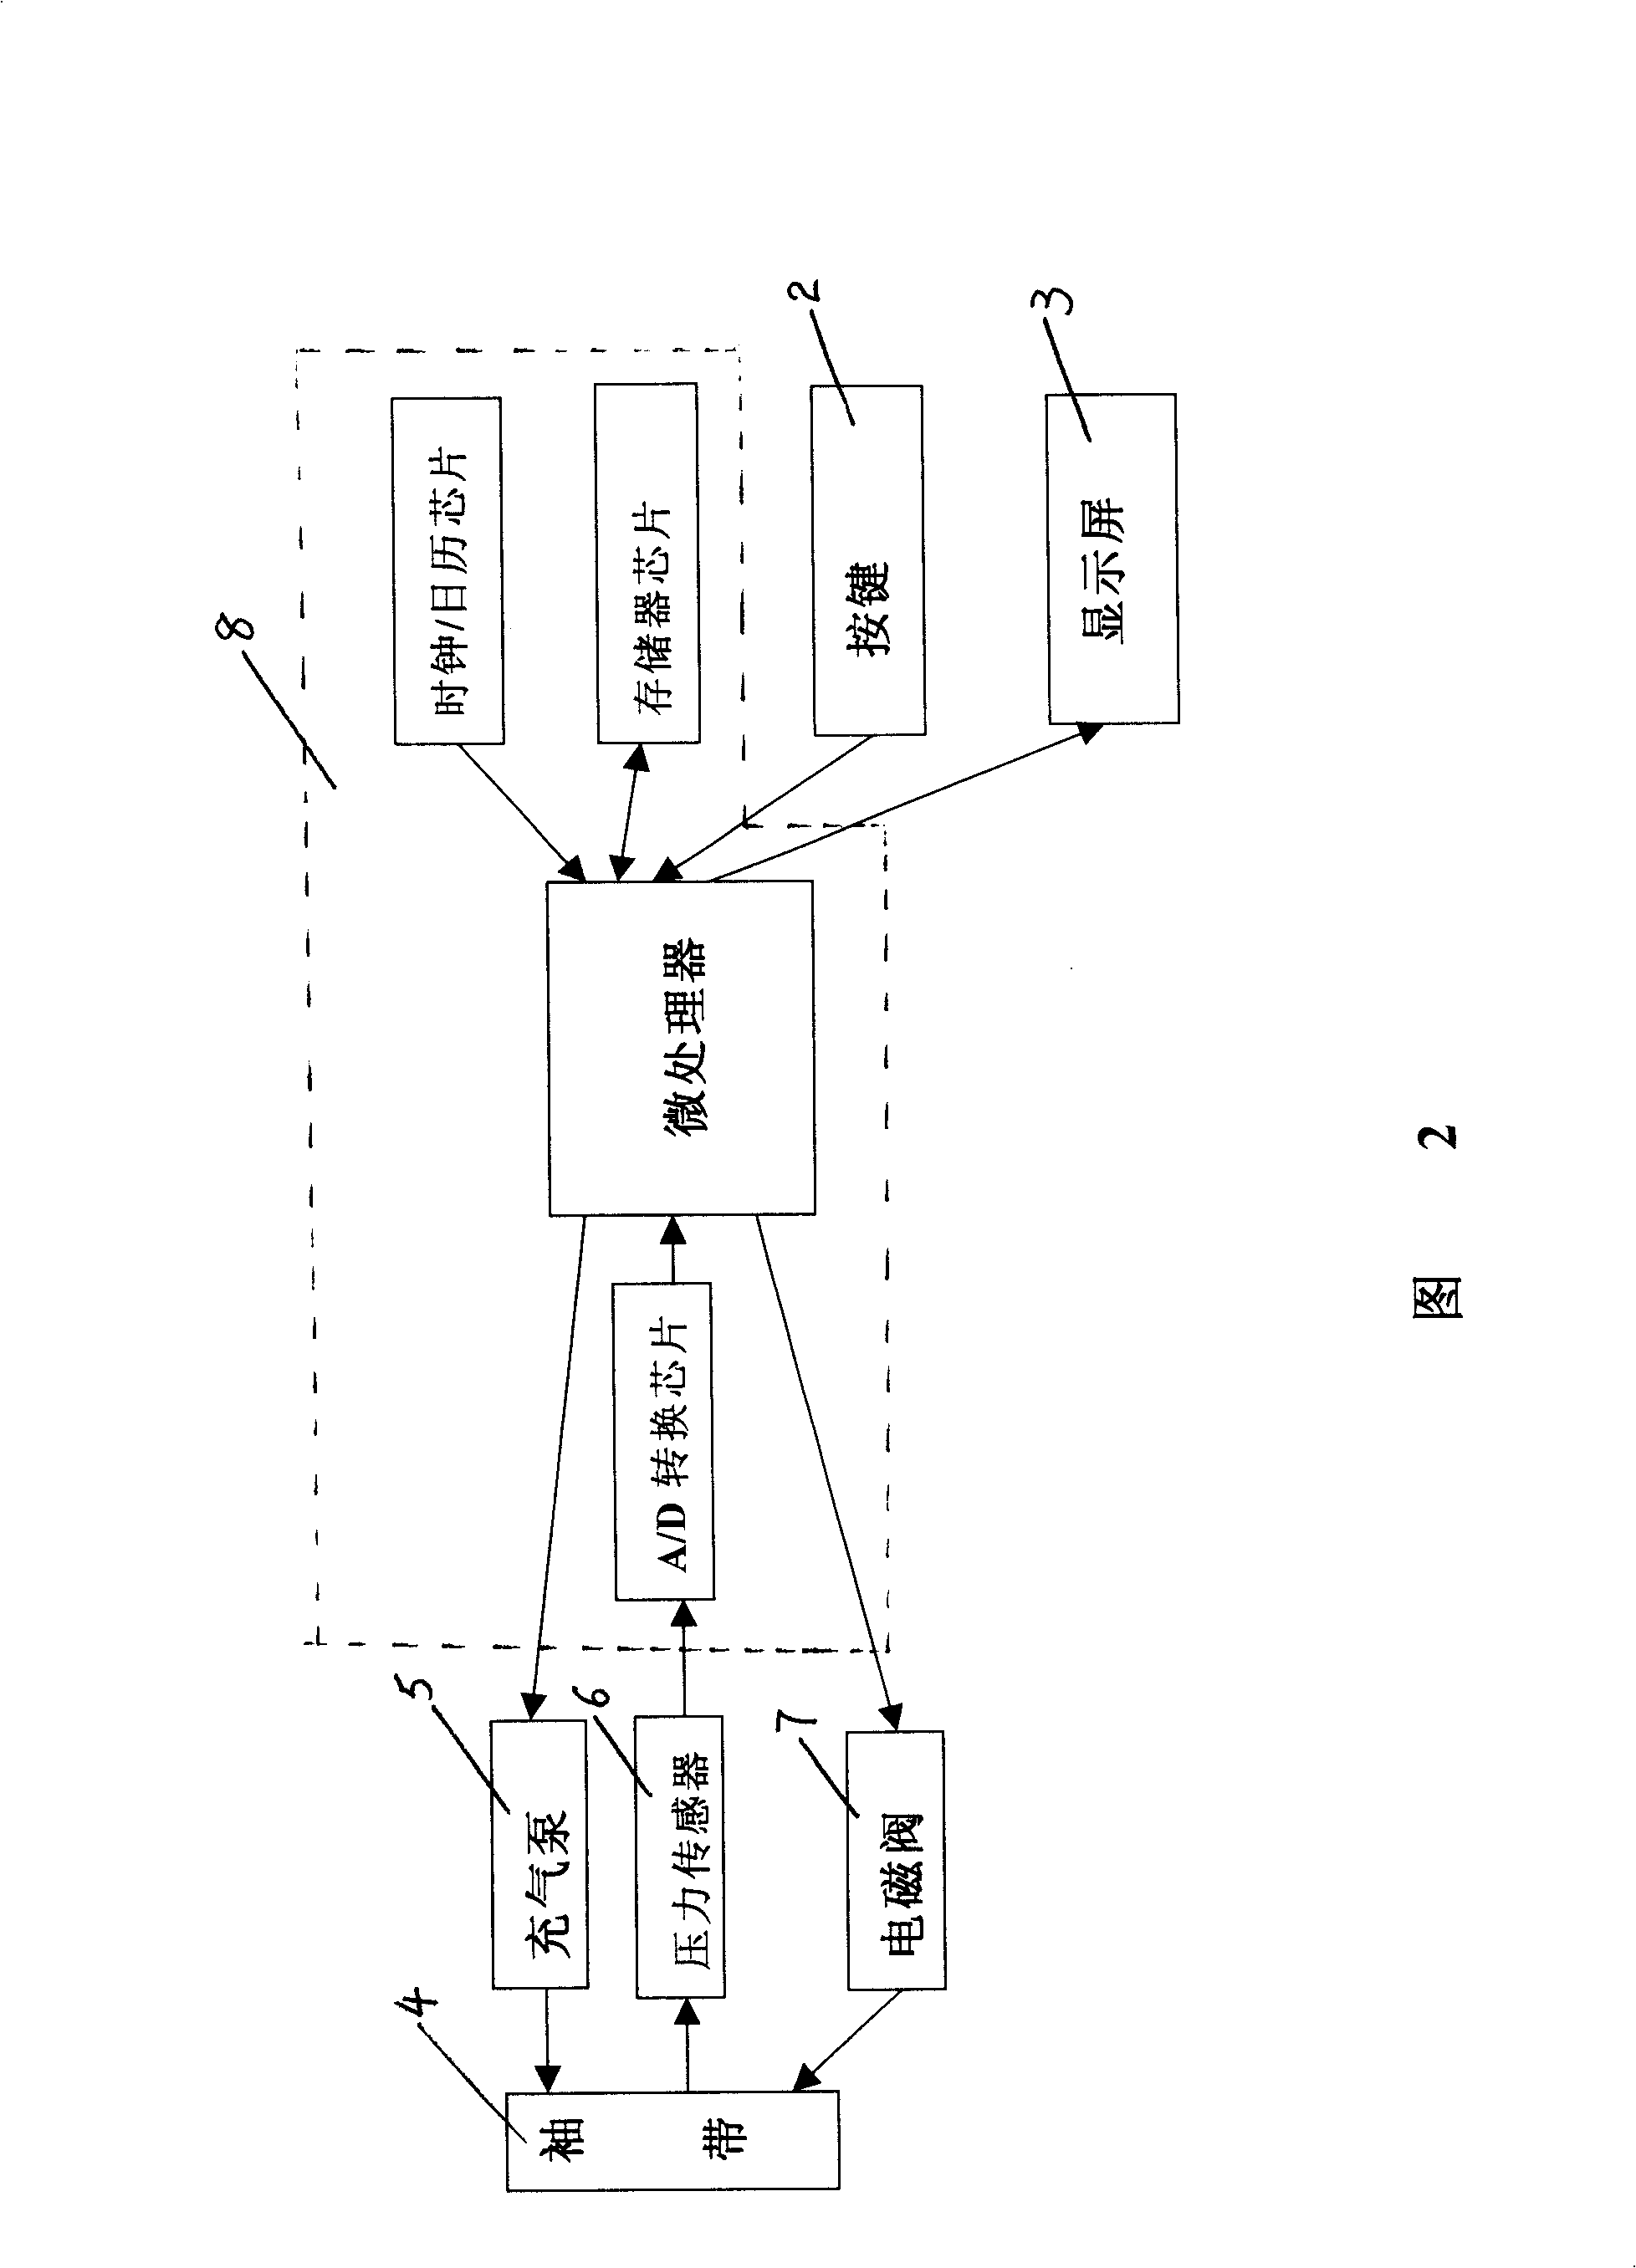 Cerebrovascular and cardiovascular health care therapeutic instrument